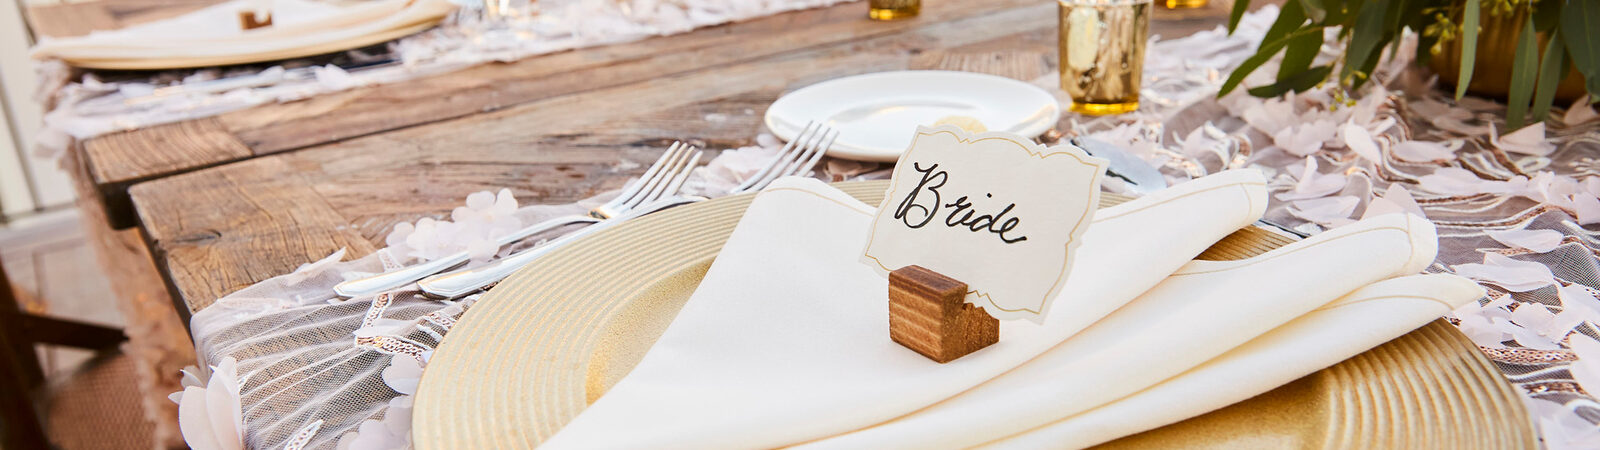 gold plate and table setting wedding